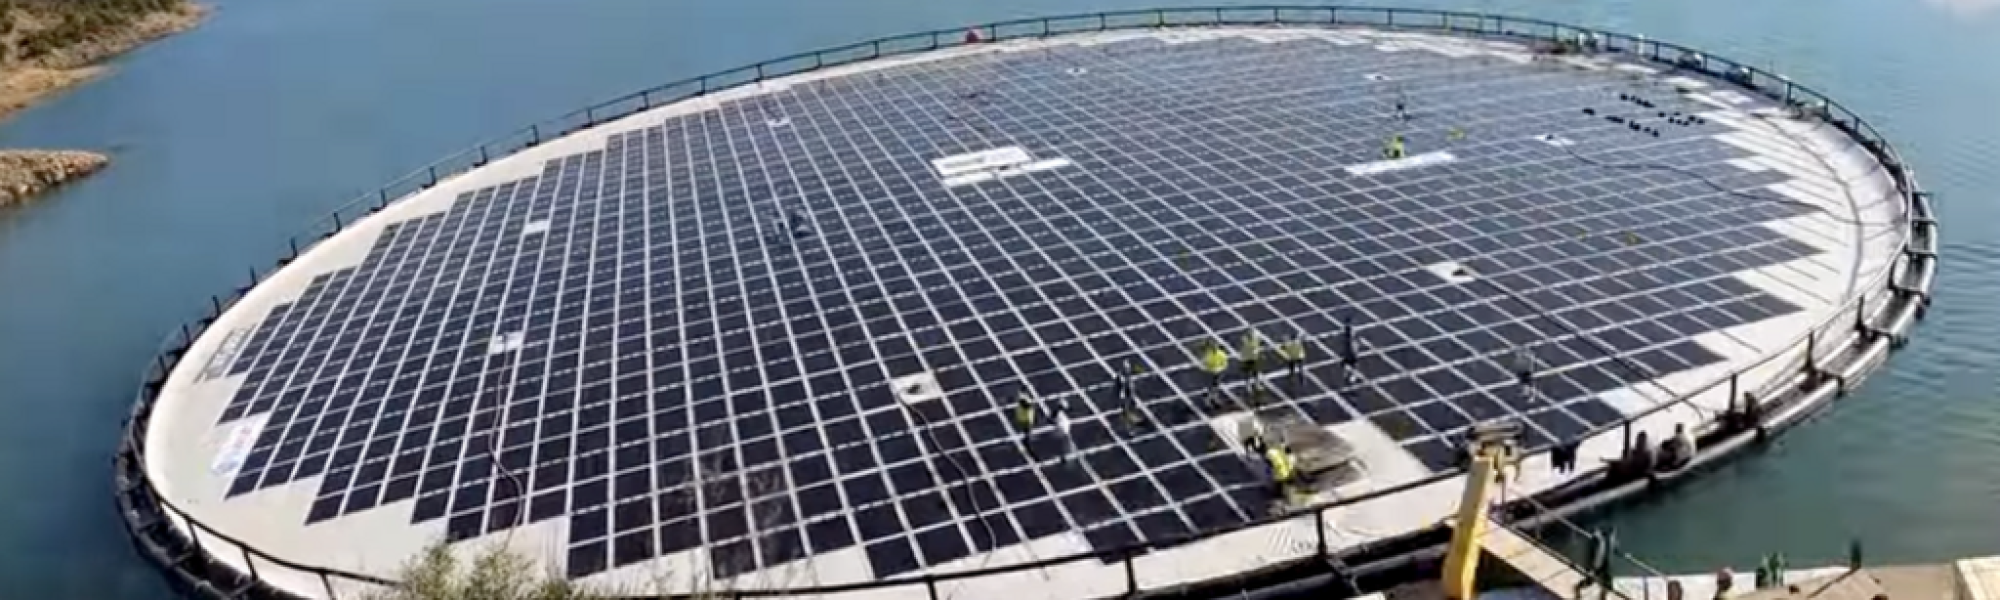 Could floating solar farms survive out at sea?